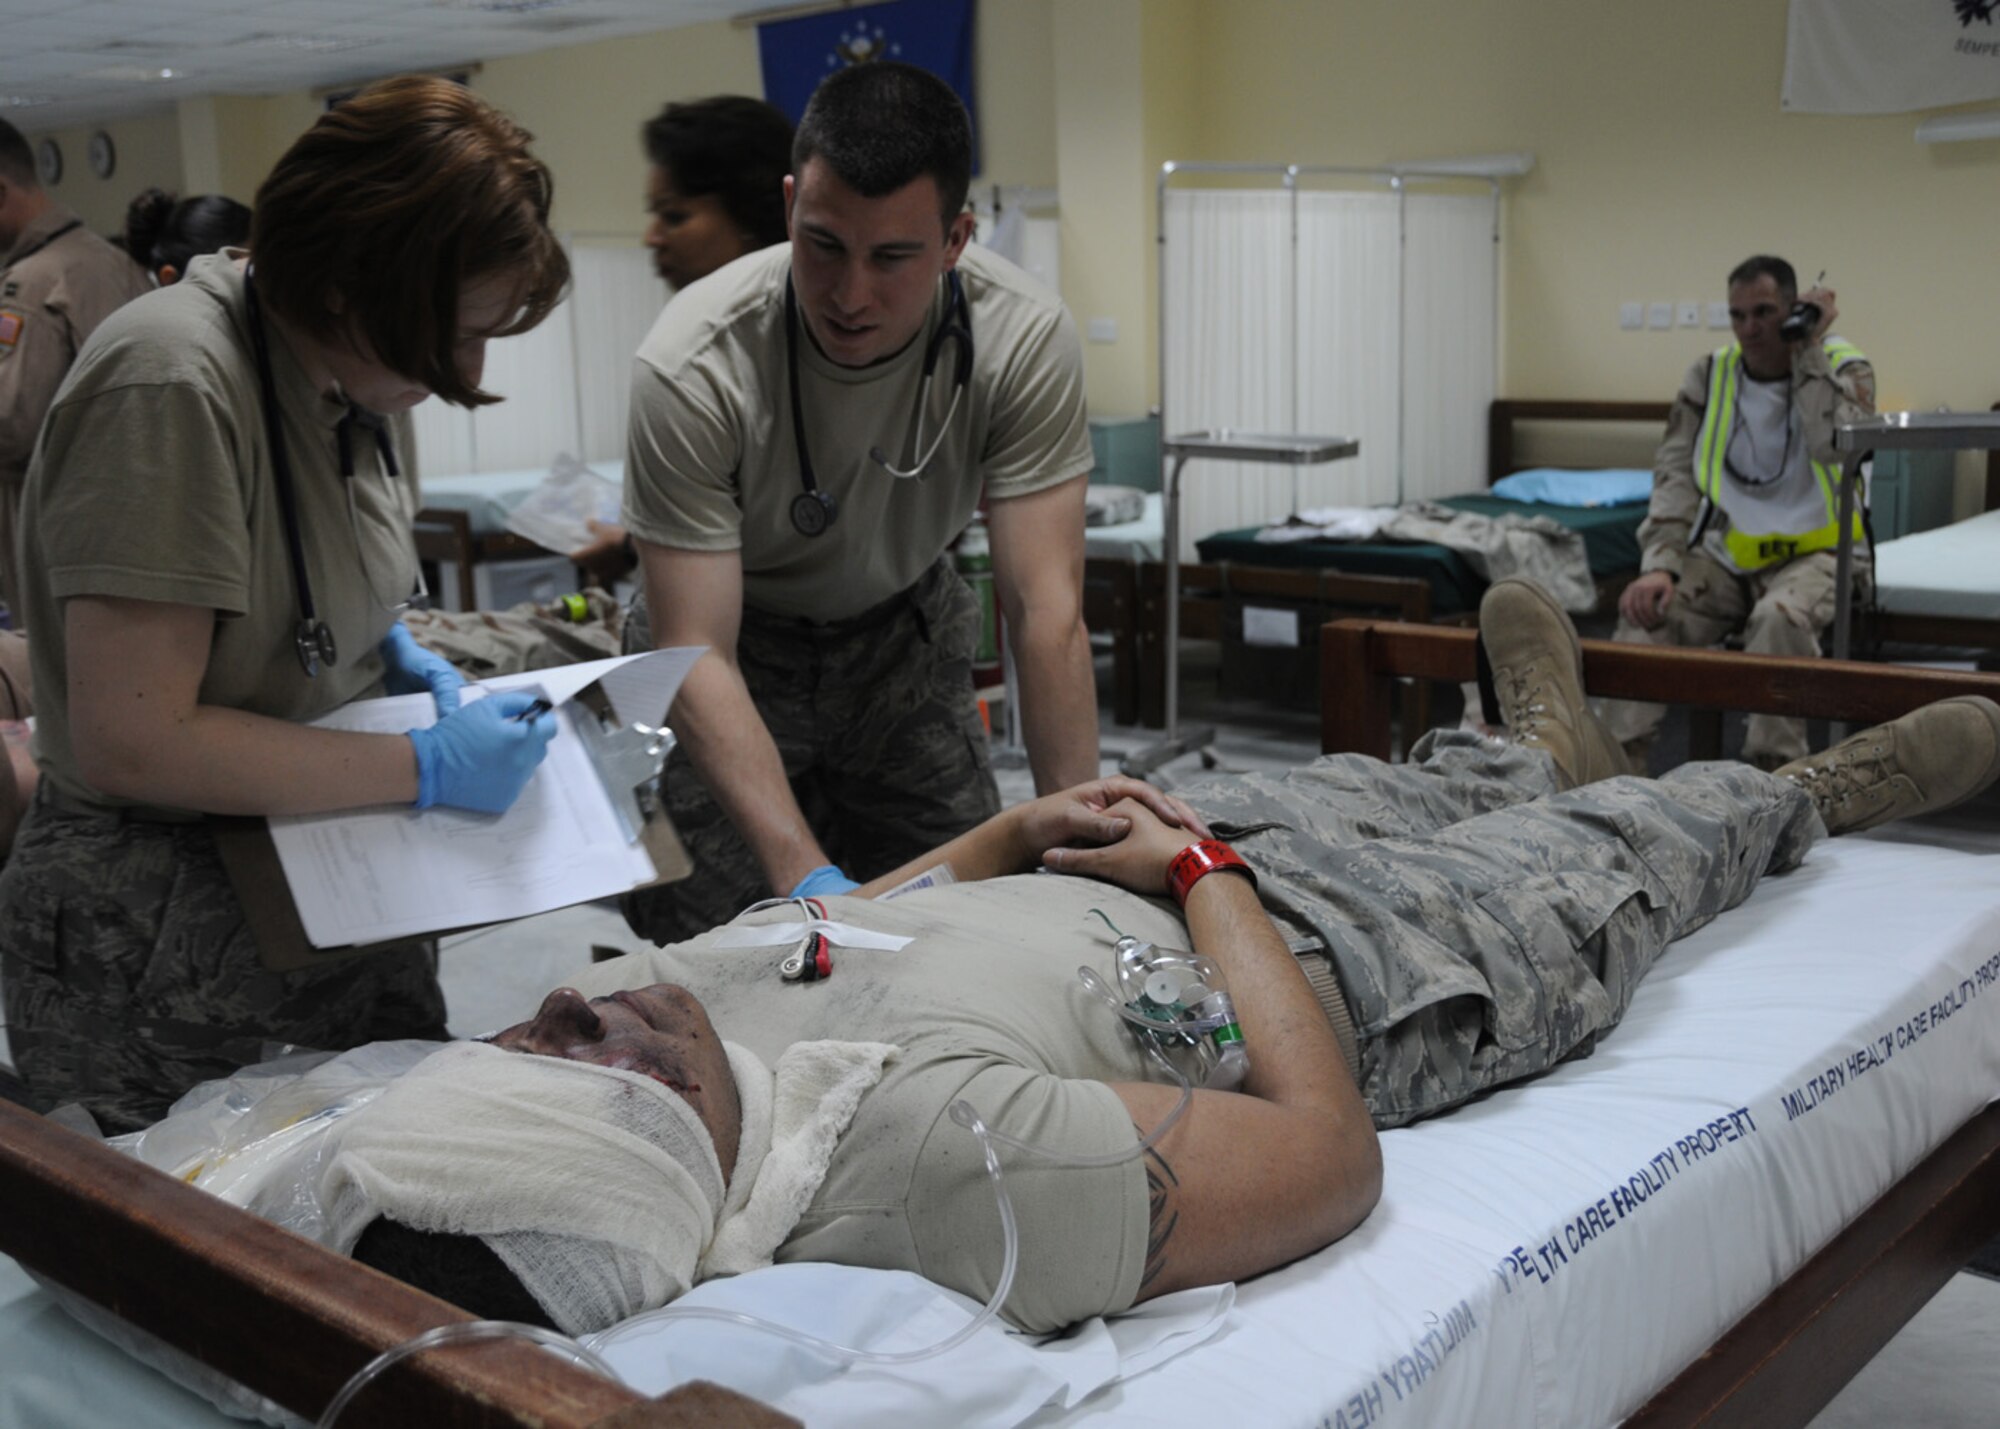 SOUTHWEST ASIA -- Capt. Donald Euler, 386th Expeditionary Medical Group ground critical care team chief, reviews a simulated patient's condition while 1st Lt. Heather Keen, 386th EMDG clinical nurse, scribes his observations on the simulated patient's chart during a Base Response and Readiness Exercise at an air base in Southwest Asia, April 13.  Once a patient is transferred from the scene to the nearest medical facility they are closely monitored until their condition becomes stable or until they are transferred to another facility for specialized care. Captain Euler and Lieutenant Keen are both currently deployed from Wright-Patterson Air Force Base, Ohio. Captain Euler is originally from Chattanooga, Tenn., and Lieutenant Keen is originally from Hastings, Neb. (U.S. Air Force photo/ Senior Airman Courtney Richardson)